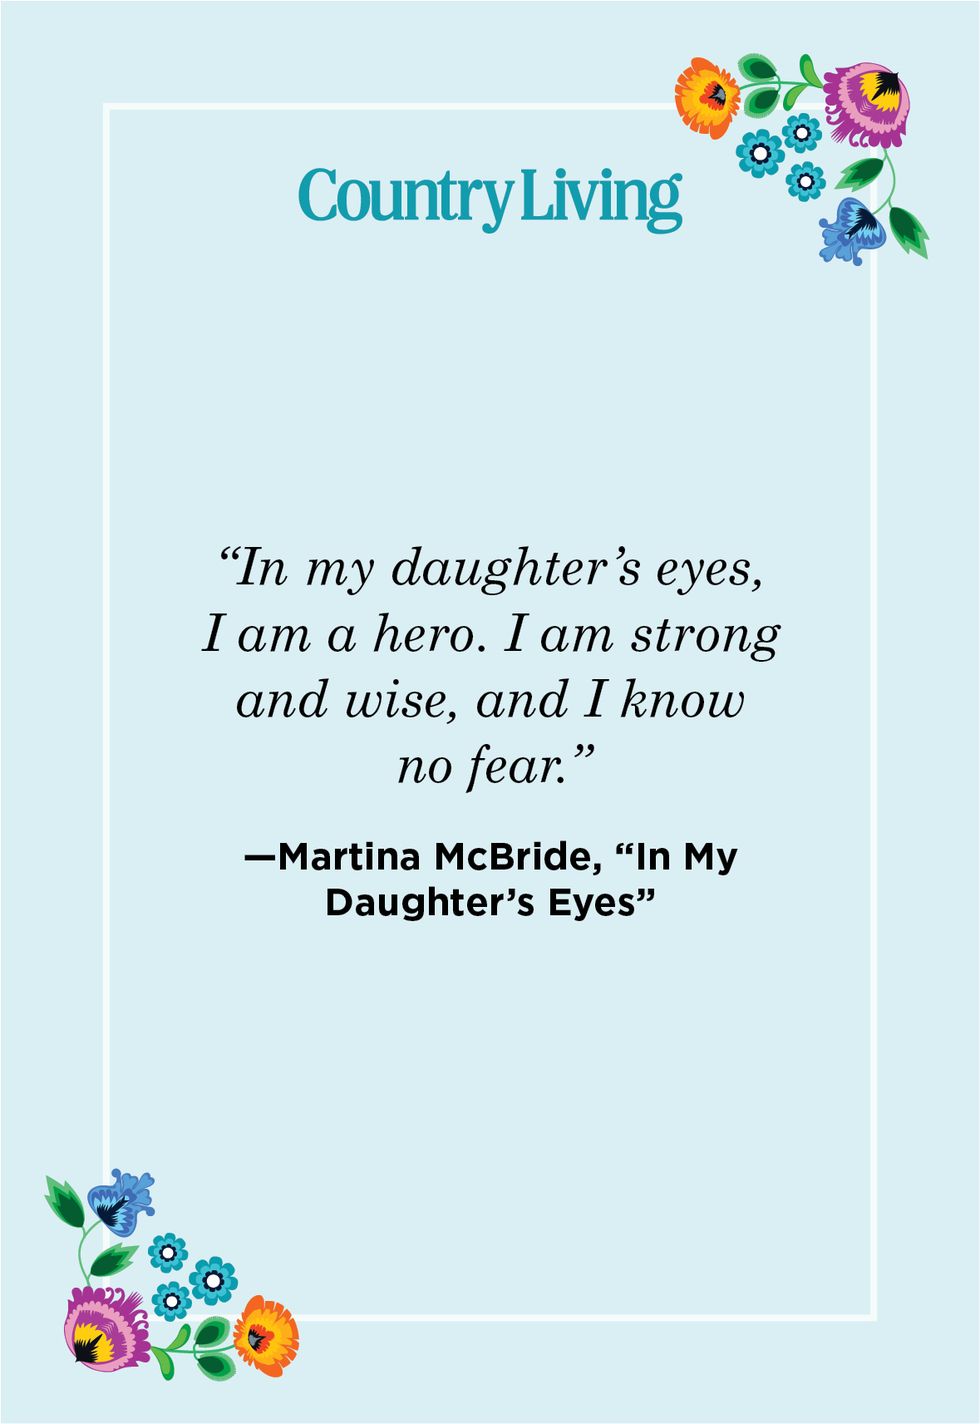 touching mother daughter quote from martina mcbride song lyrics